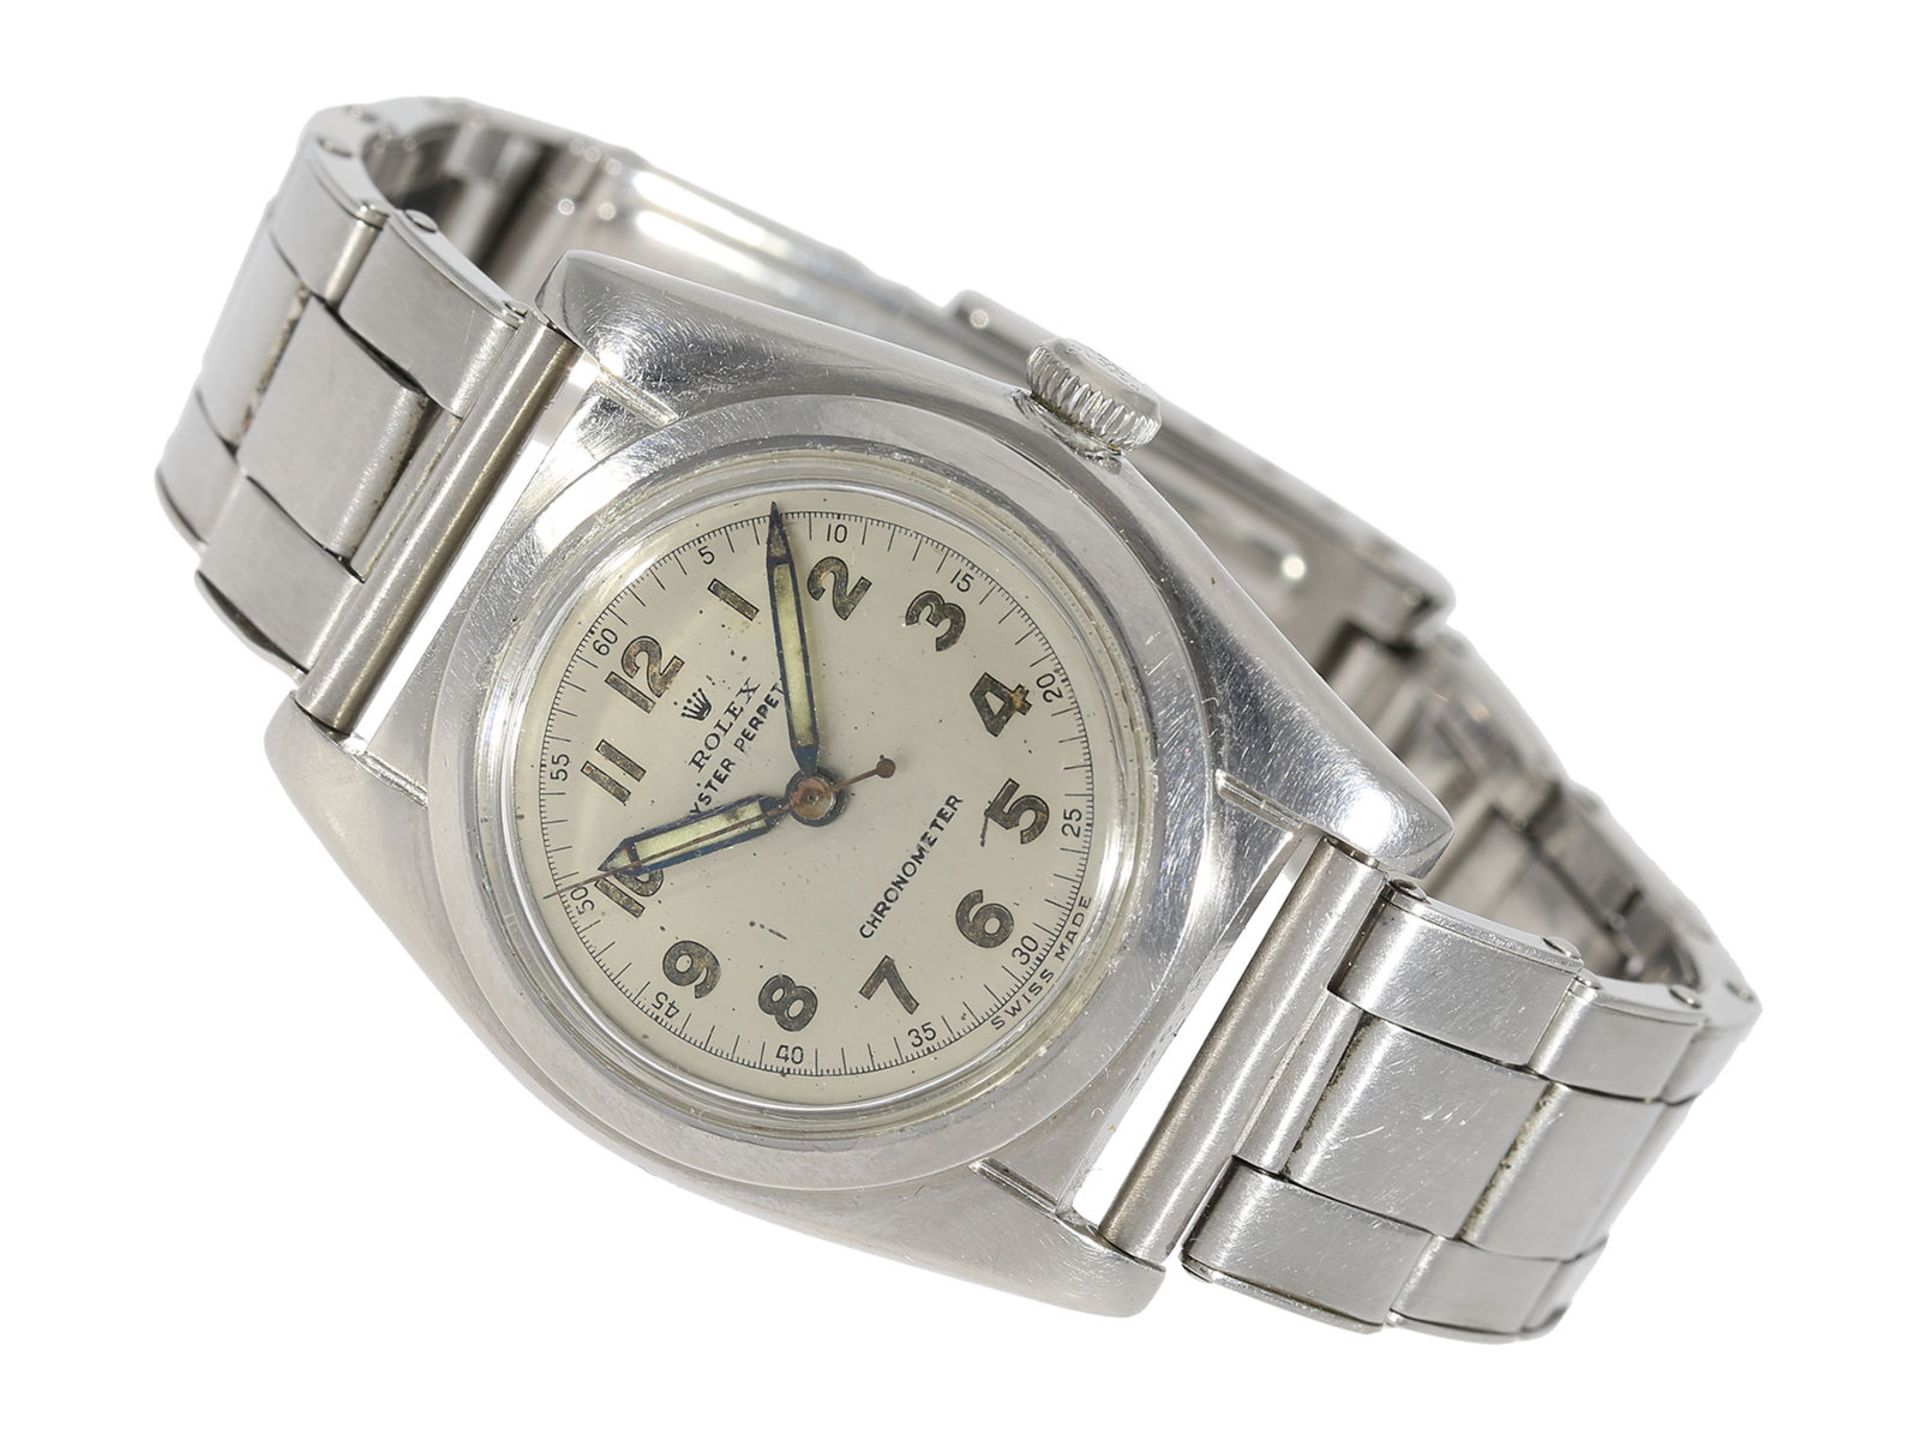 Wristwatch: early Rolex Bubble Back Chronometer with centre seconds, from the 1940s